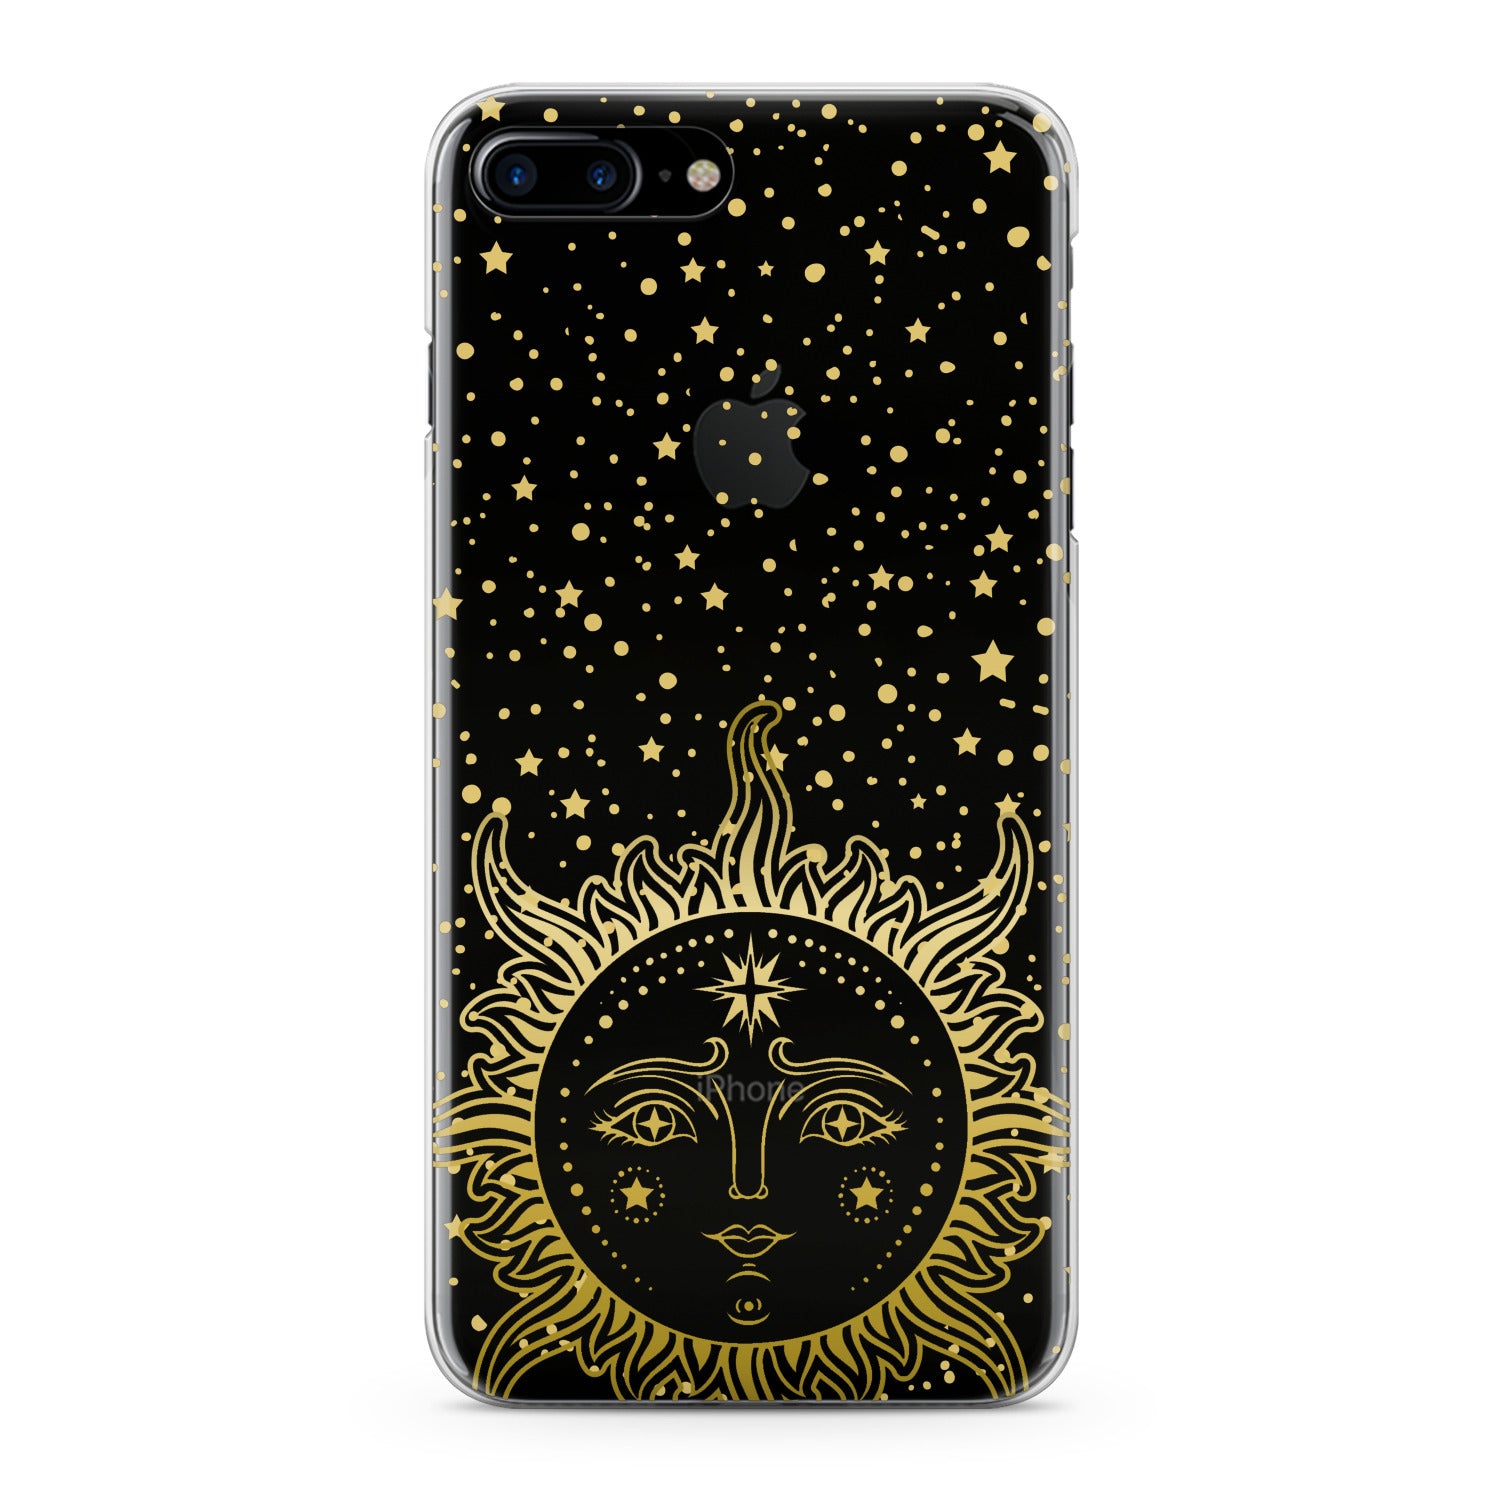 Lex Altern Golden Sun Shining Phone Case for your iPhone & Android phone.